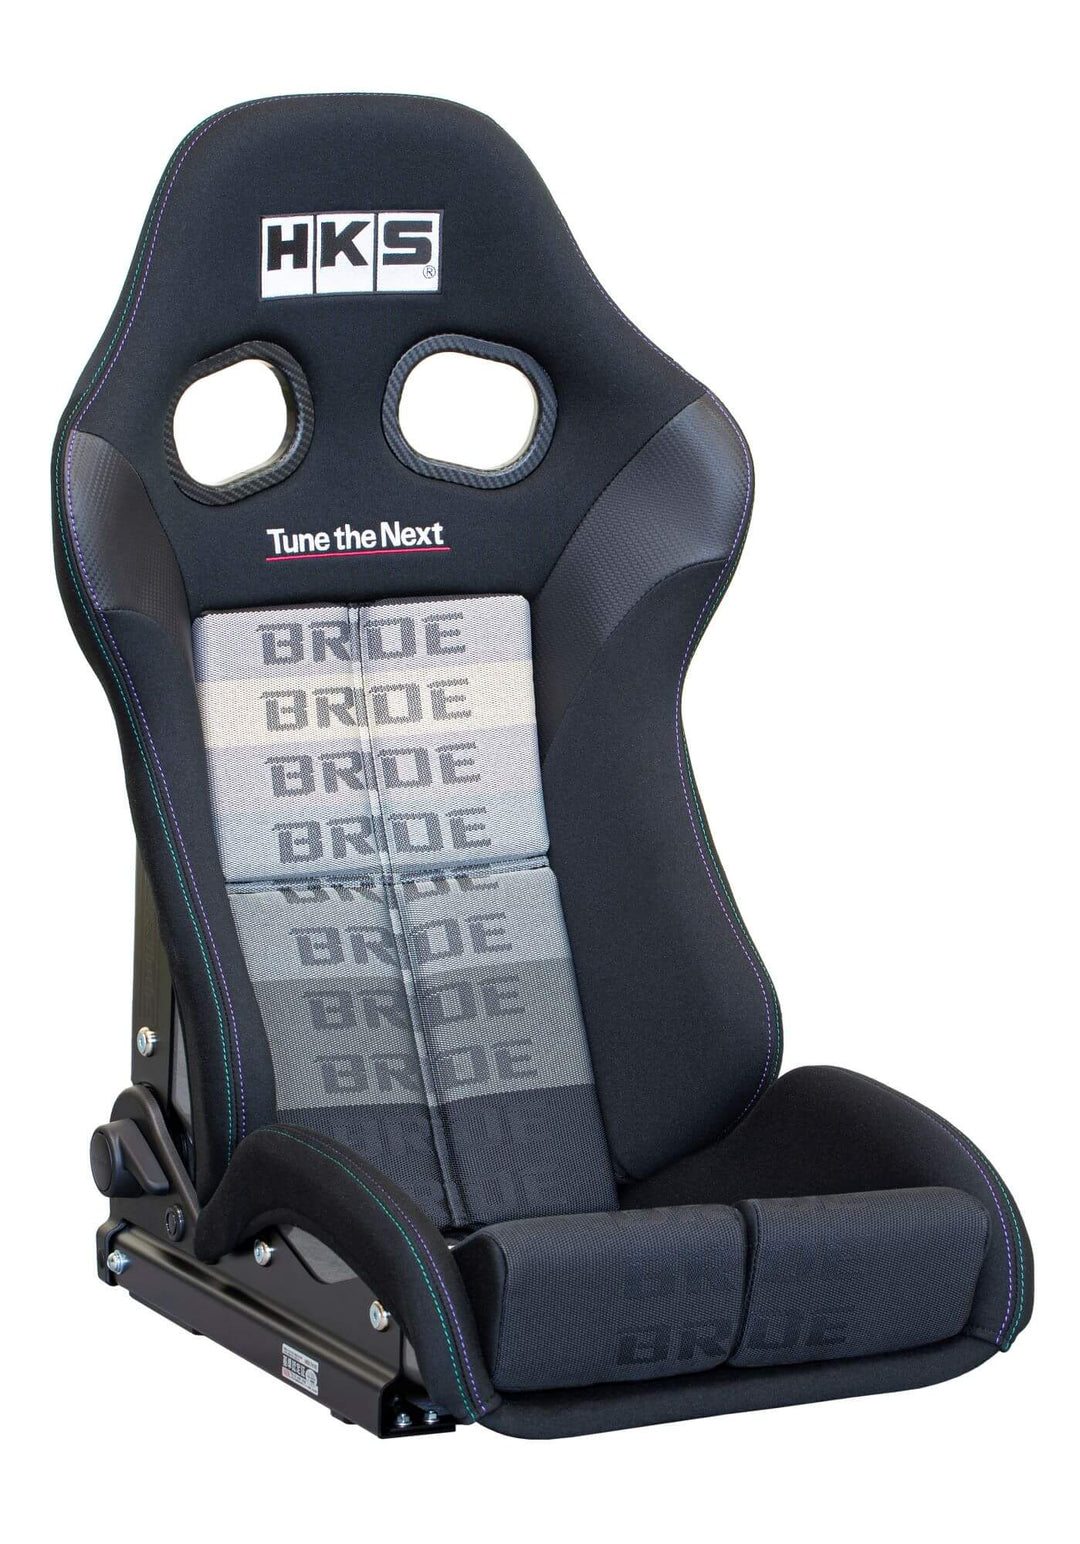 BRIDE x HKS 50th Anniversary Bucket Seat STRADIA III *available now*